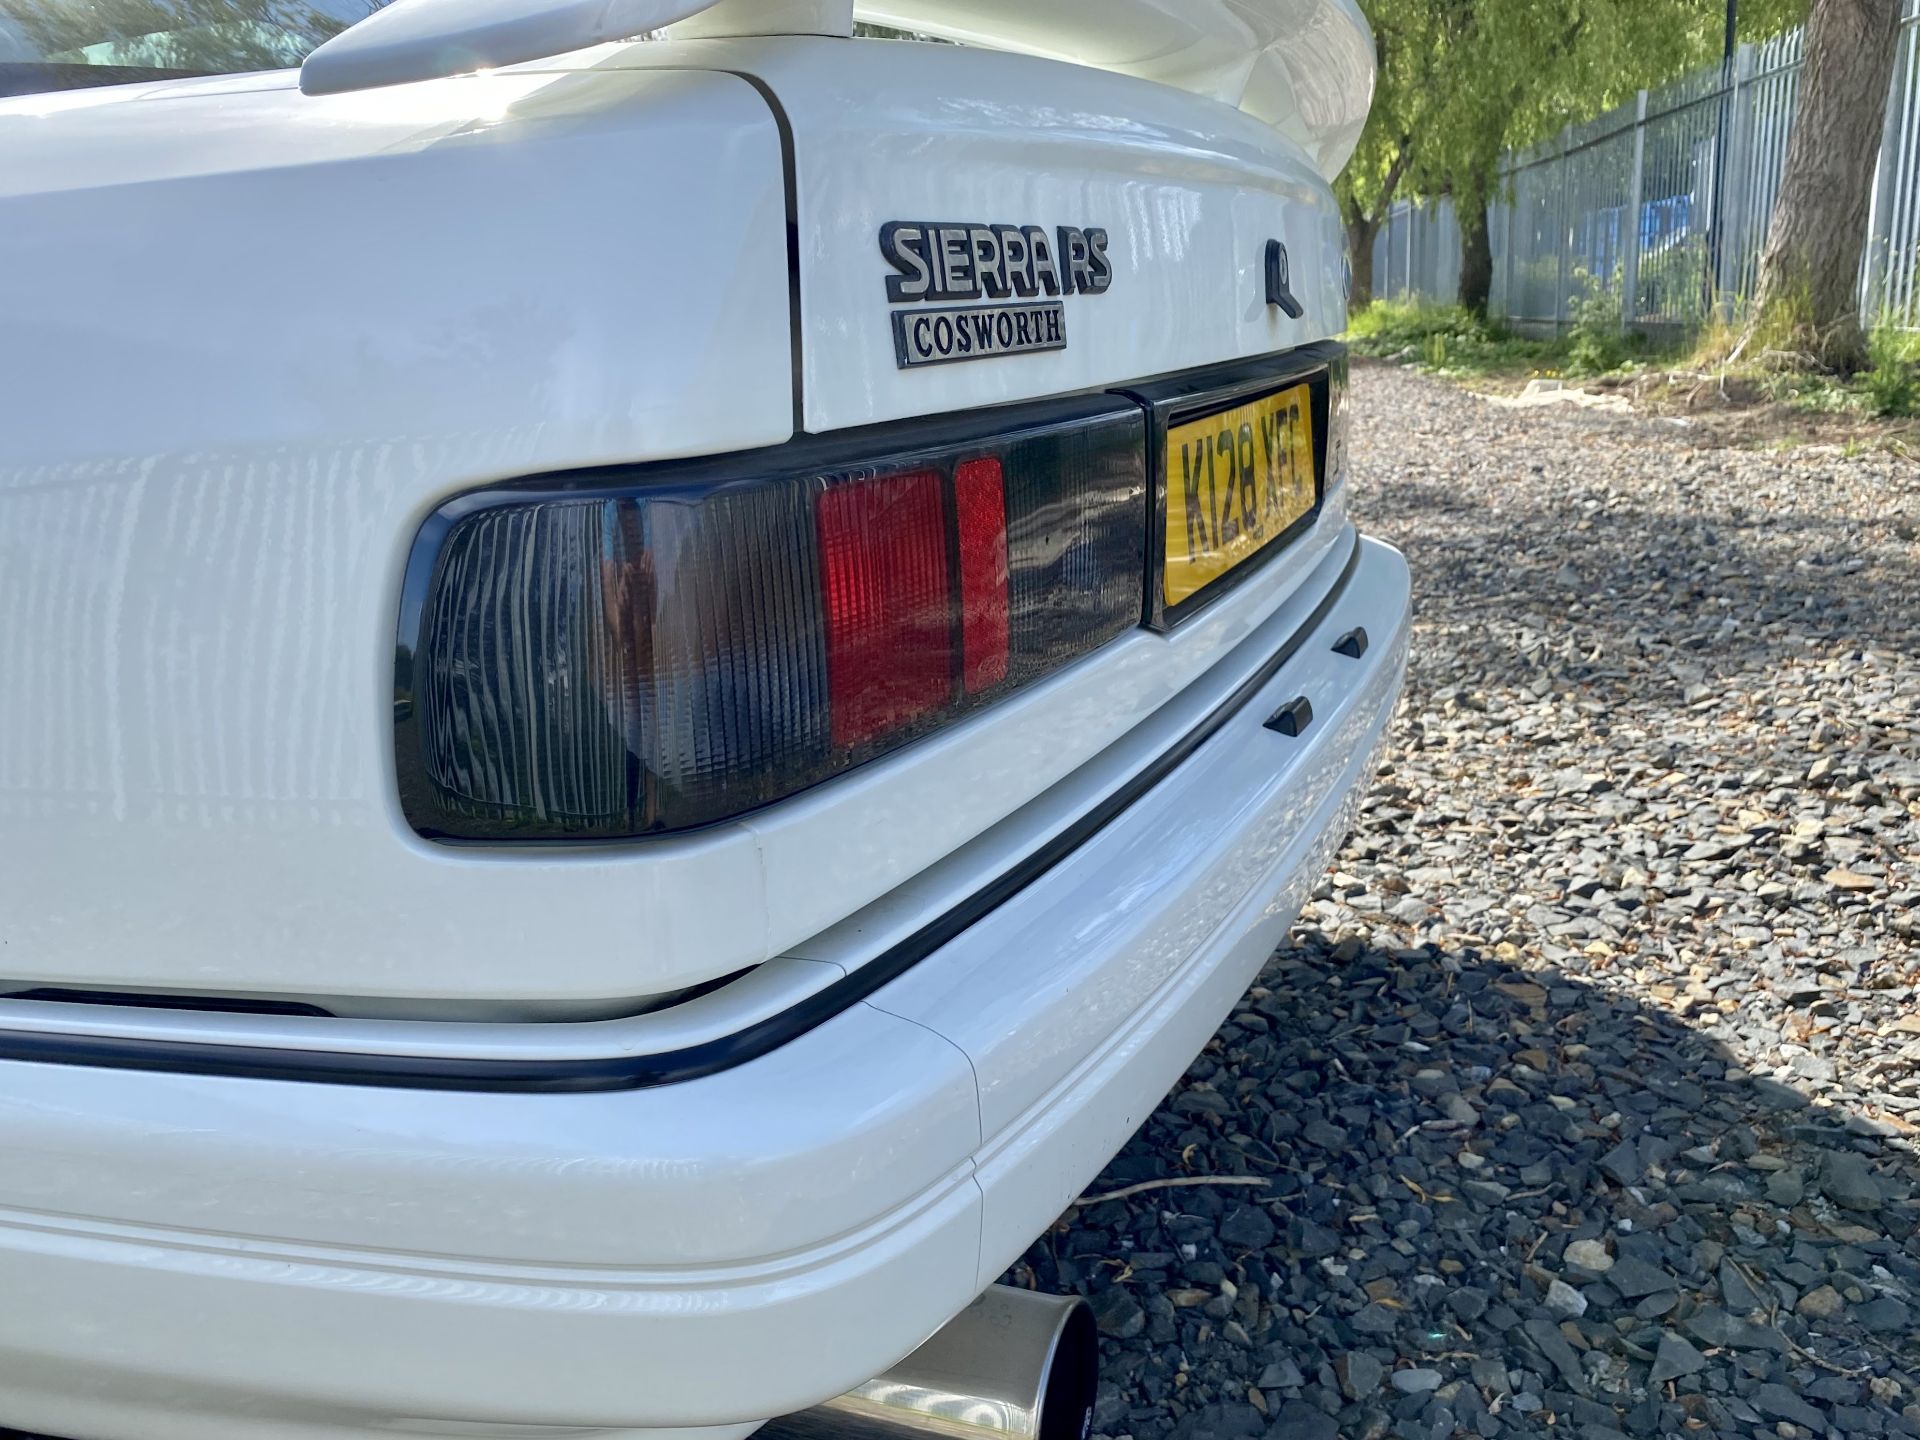 Ford Sierra Sapphire Cosworth 4x4 - Image 22 of 55